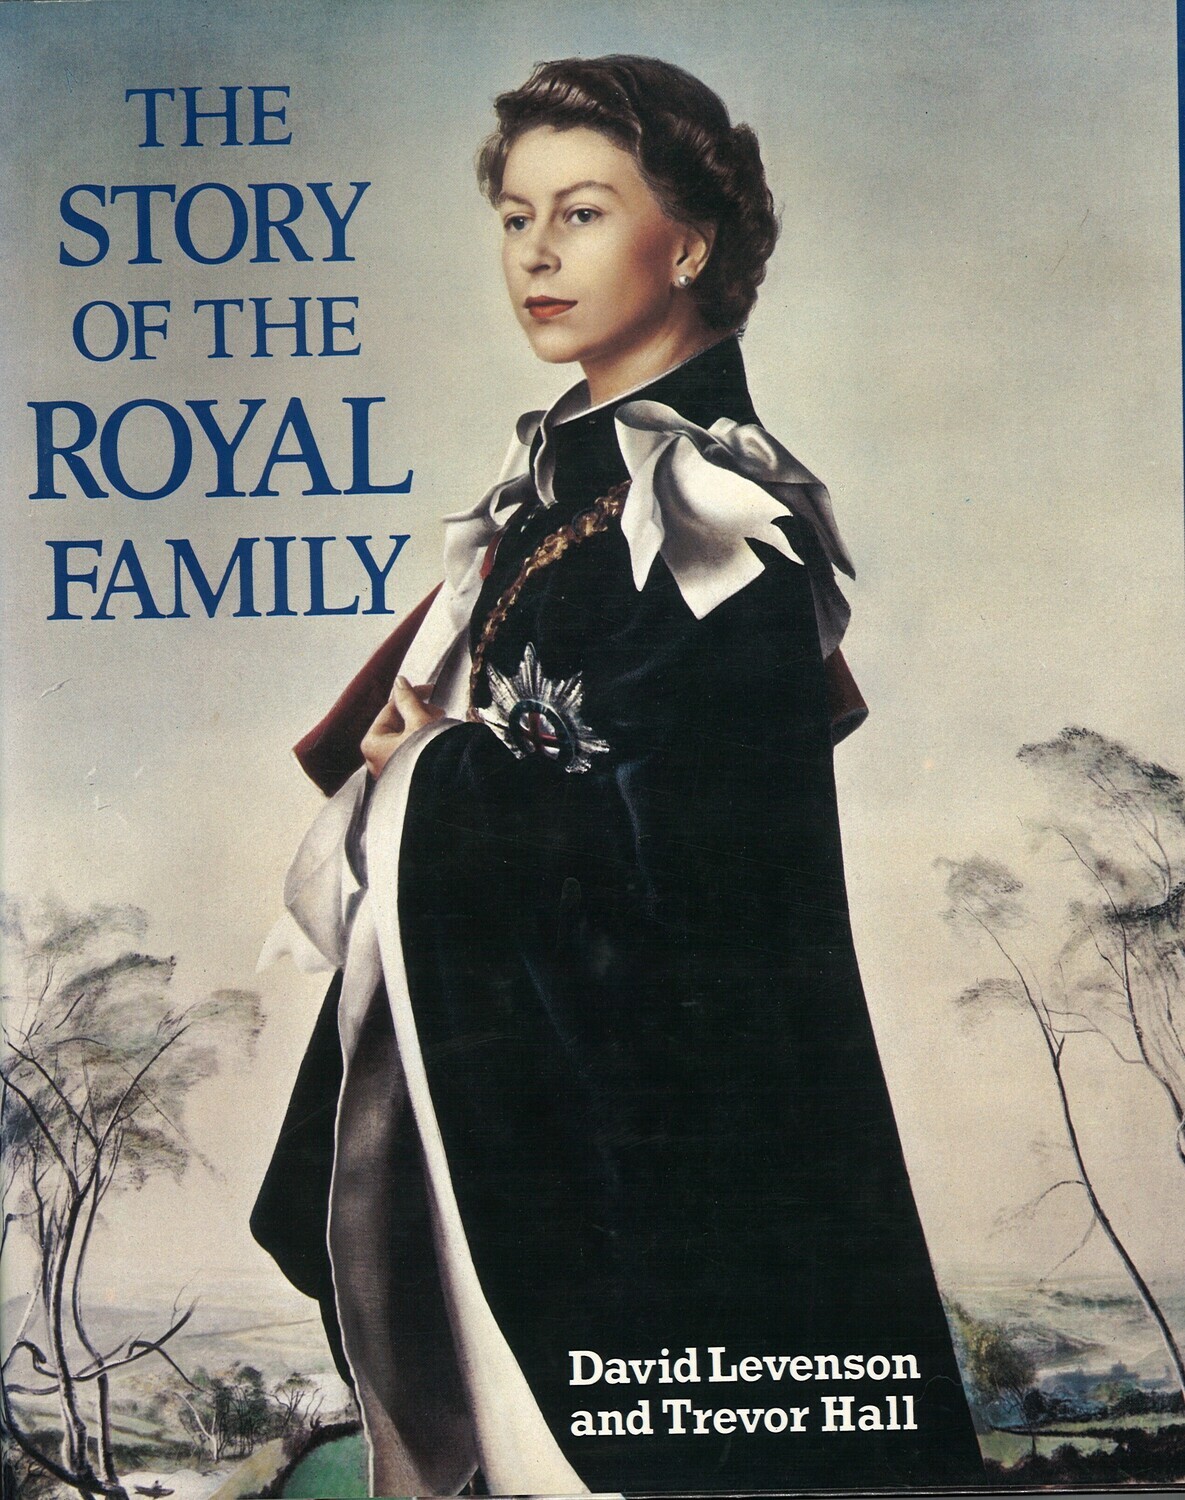 The Story of The Royal Family